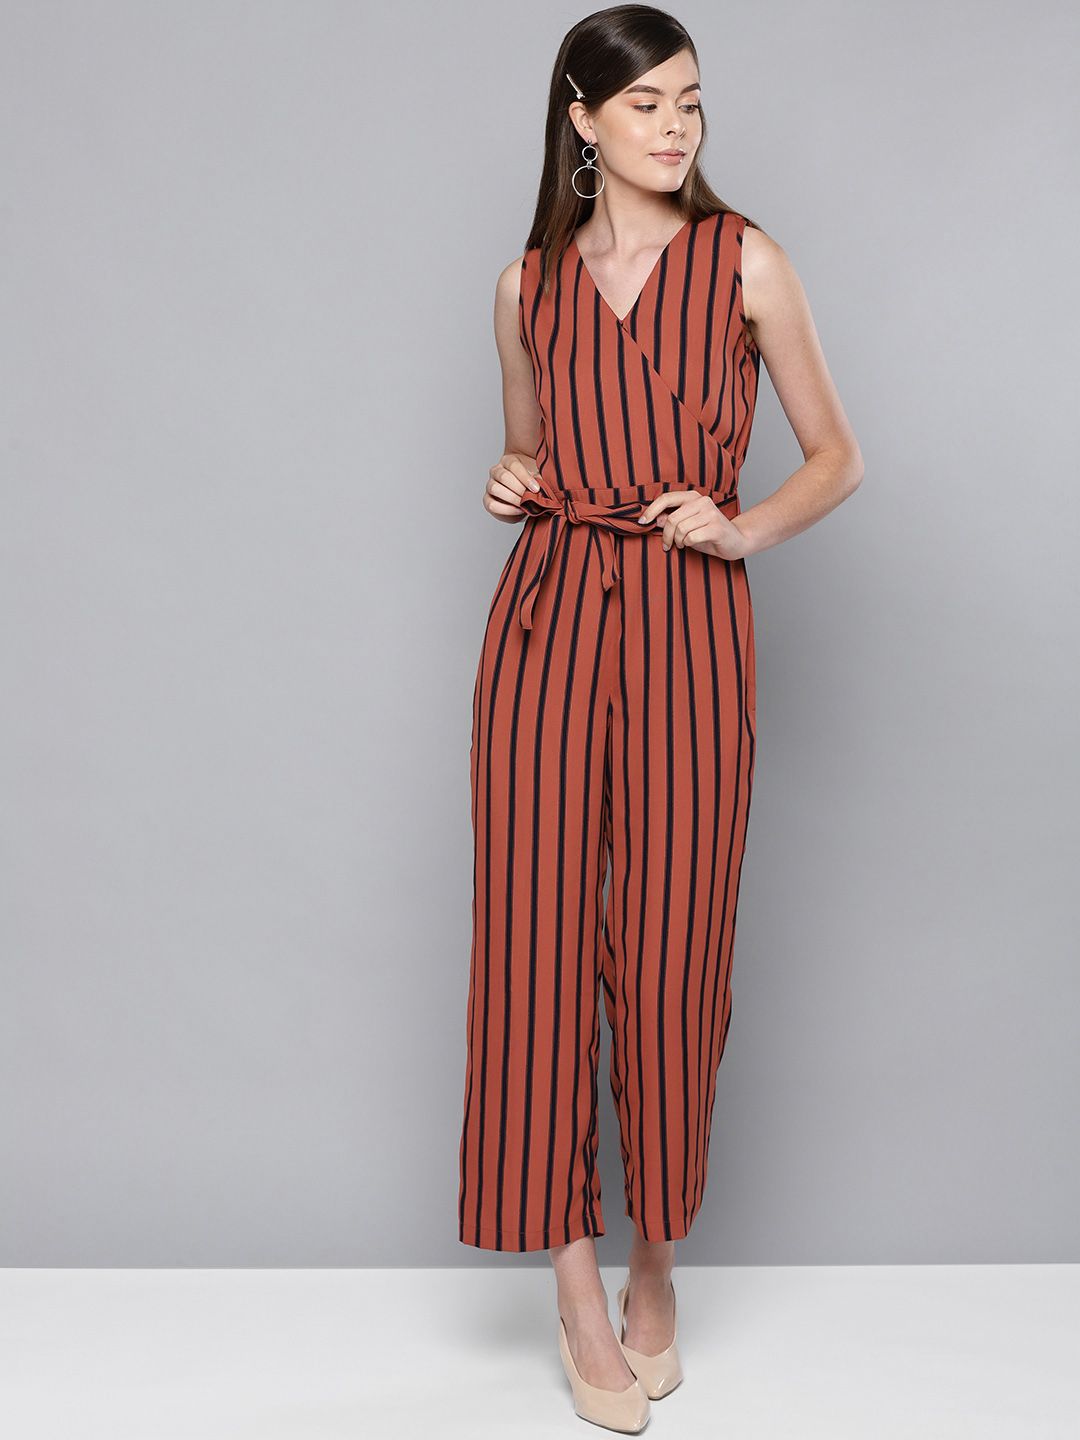 STREET 9 Women Rust Red & Black Striped Basic Jumpsuit Price in India